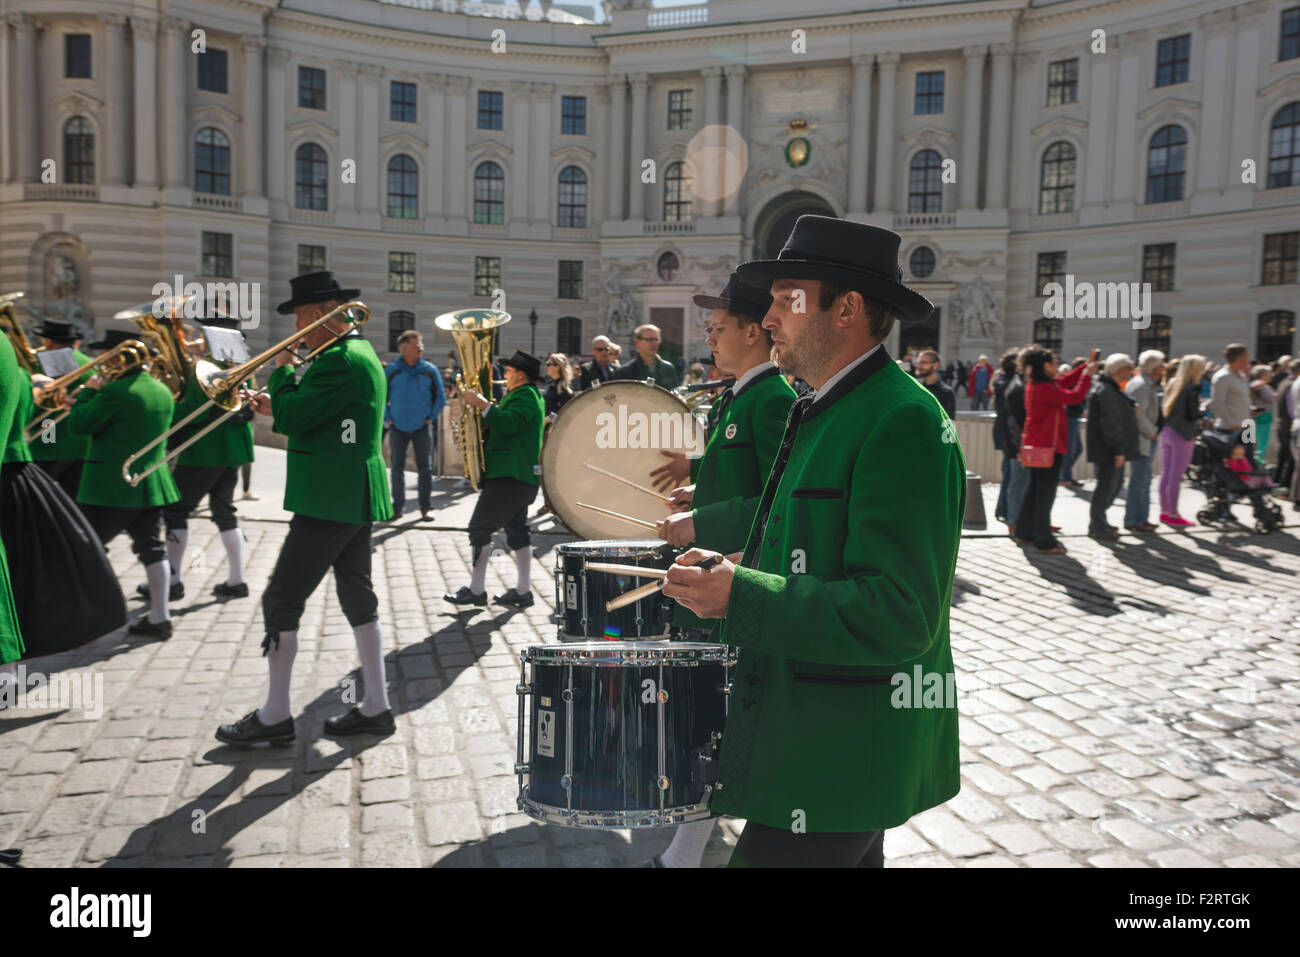 Tyrolean band, a band of Tyrolean musicians march past the Michaelerplatz entrance to the Hofburg Palace in Vienna, Austria. Stock Photo